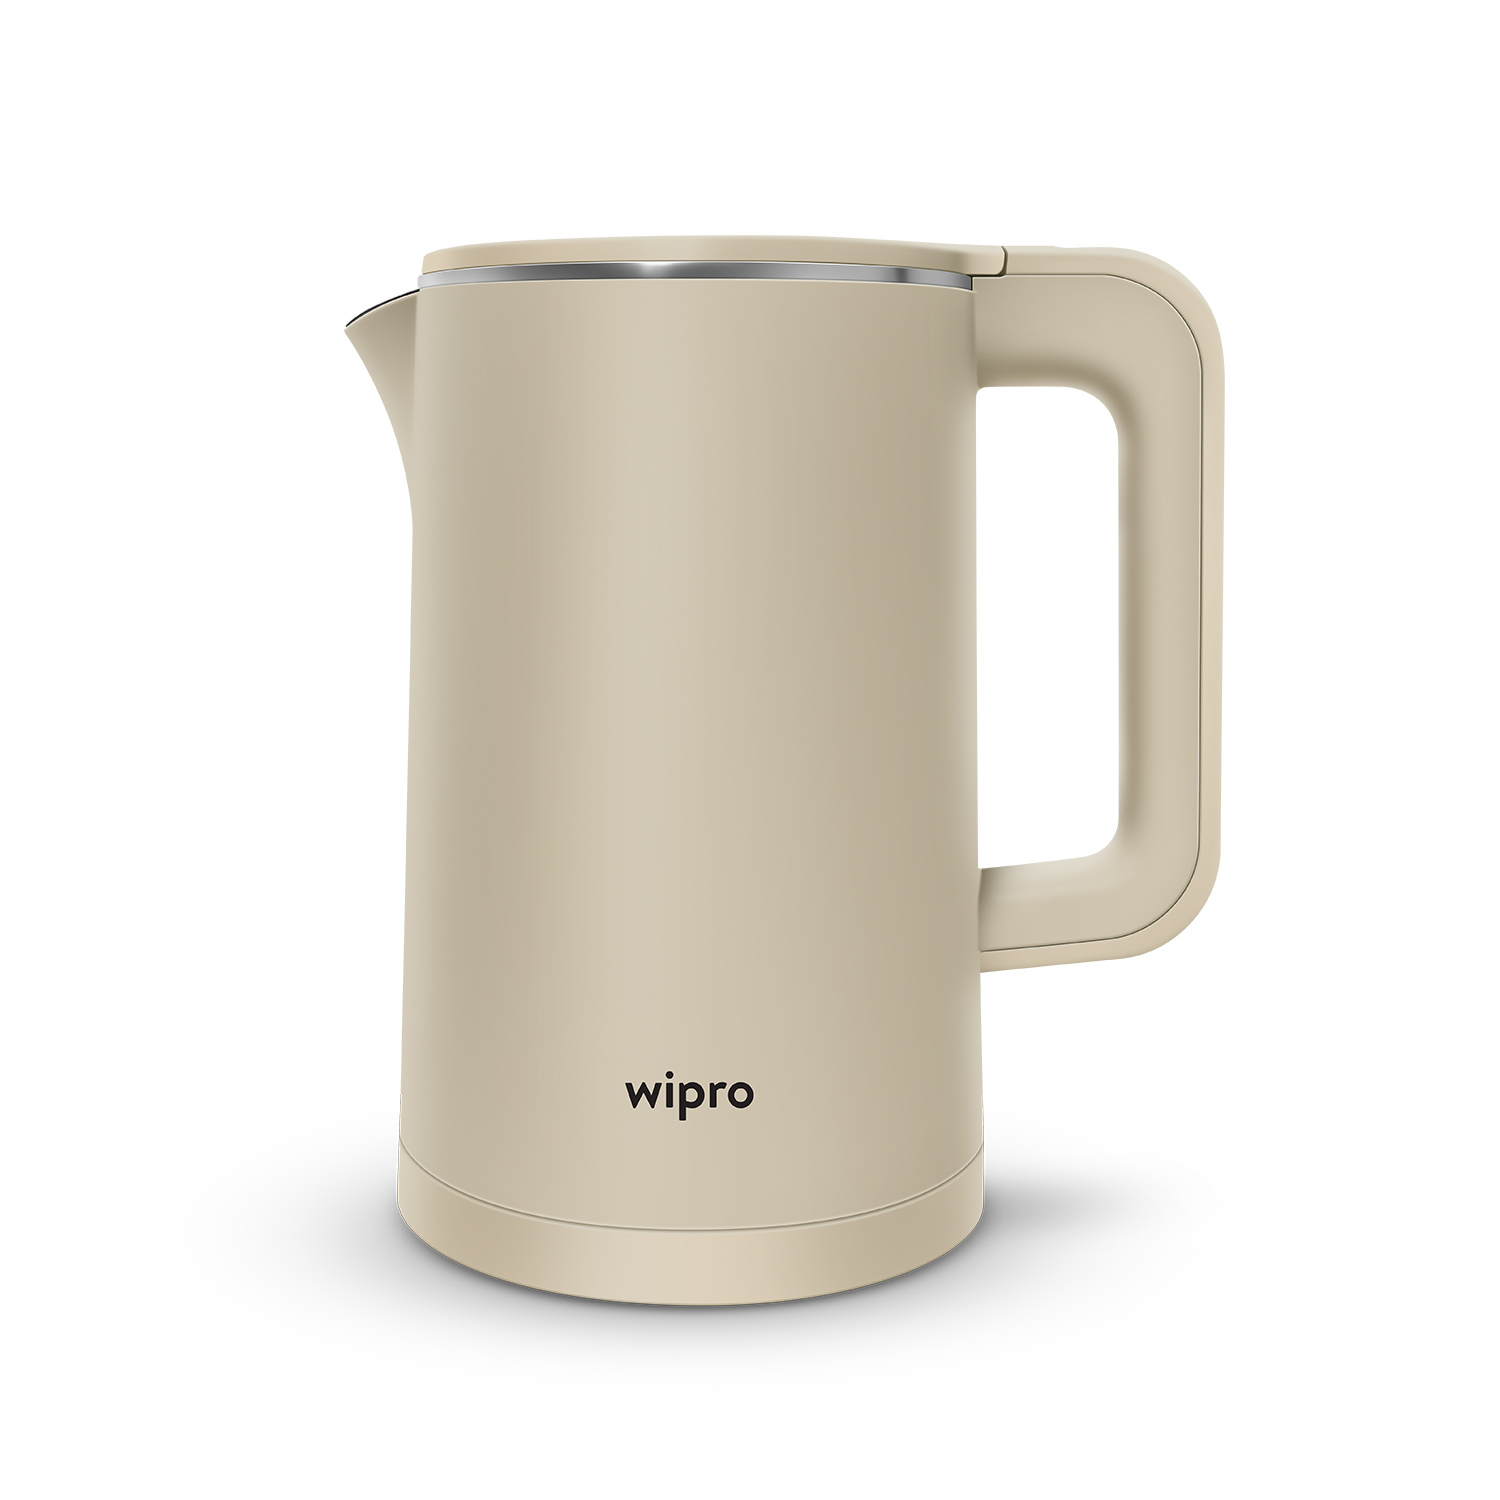 Wipro Vesta 1.8L BK206 Cool Touch Kettle|Anti - Rust Shield|SS304|Super Fast Heating|Triple Layer Protection - Overheating, Dry Boil & Excess Steam|Single Touch Open Lid